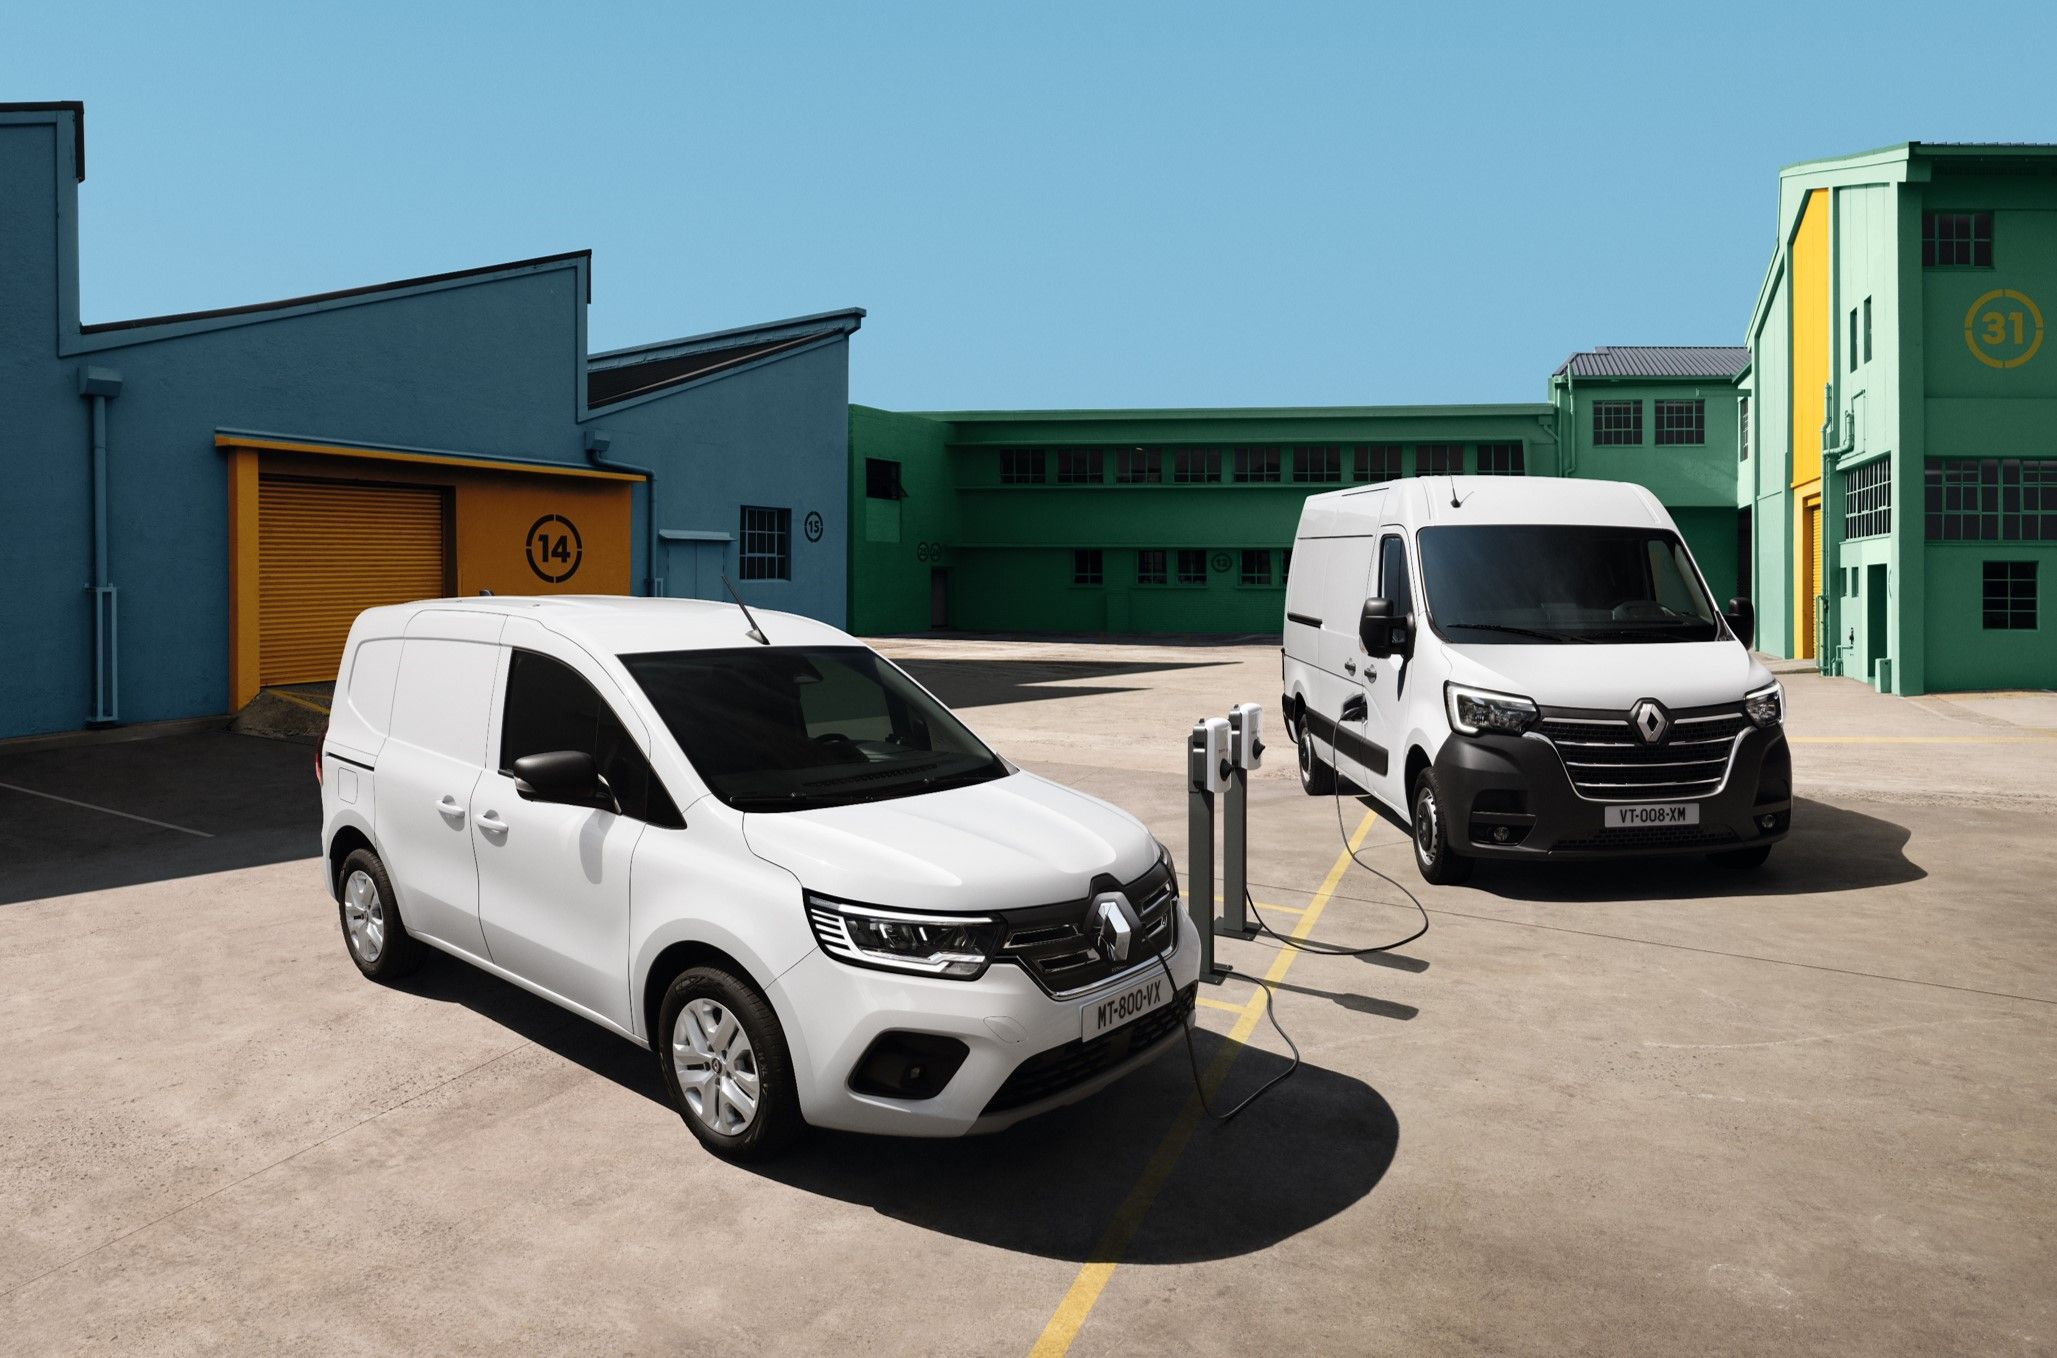 Renault's new generation of electric commercial vehicles: Renault